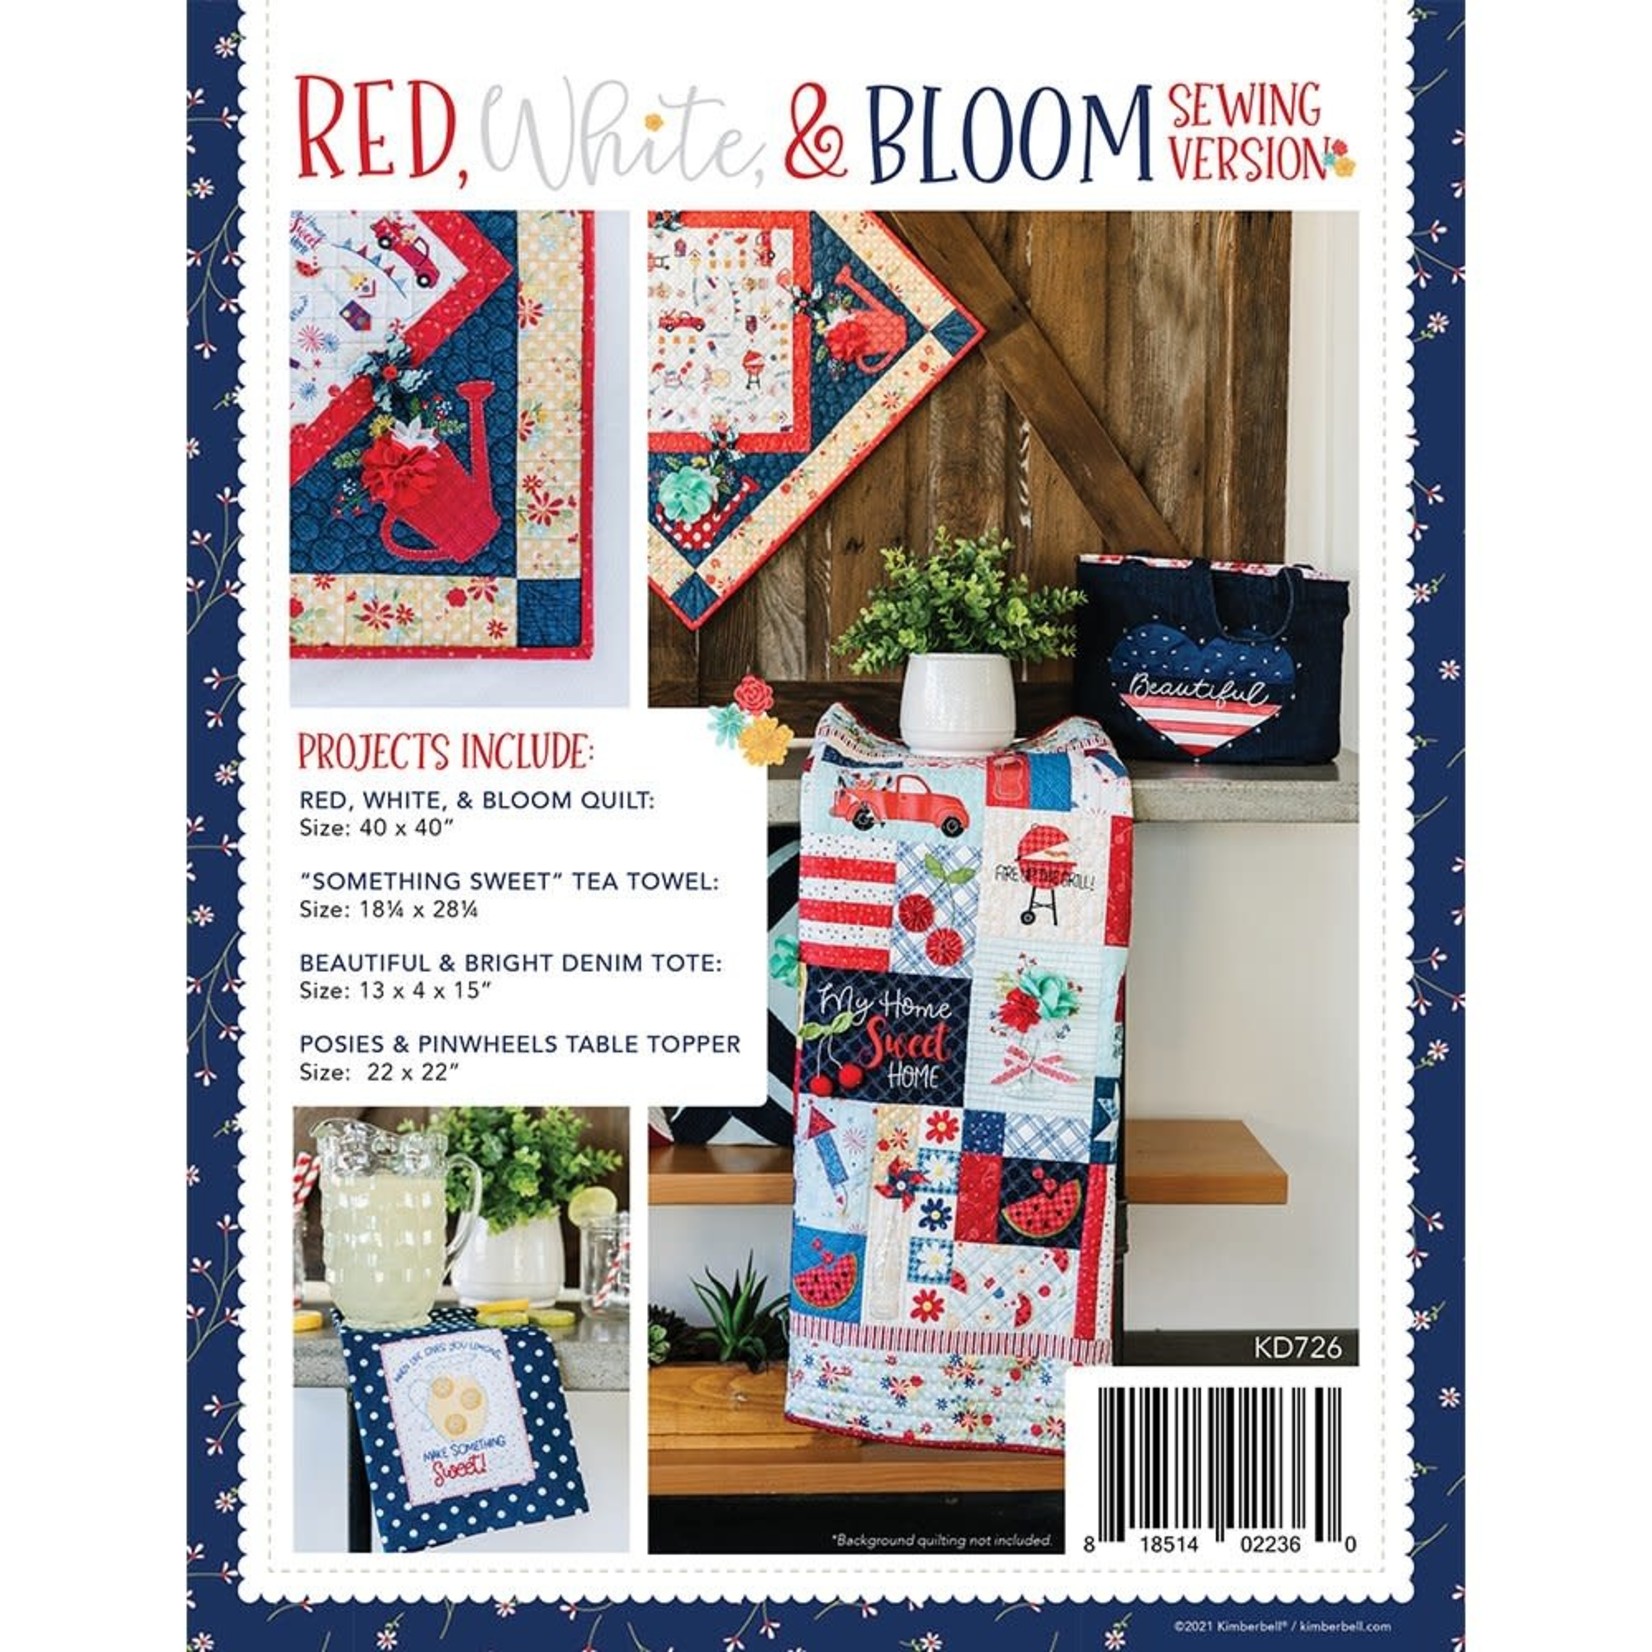 Kimberbell Designs Red White & Bloom (Sewing Version)